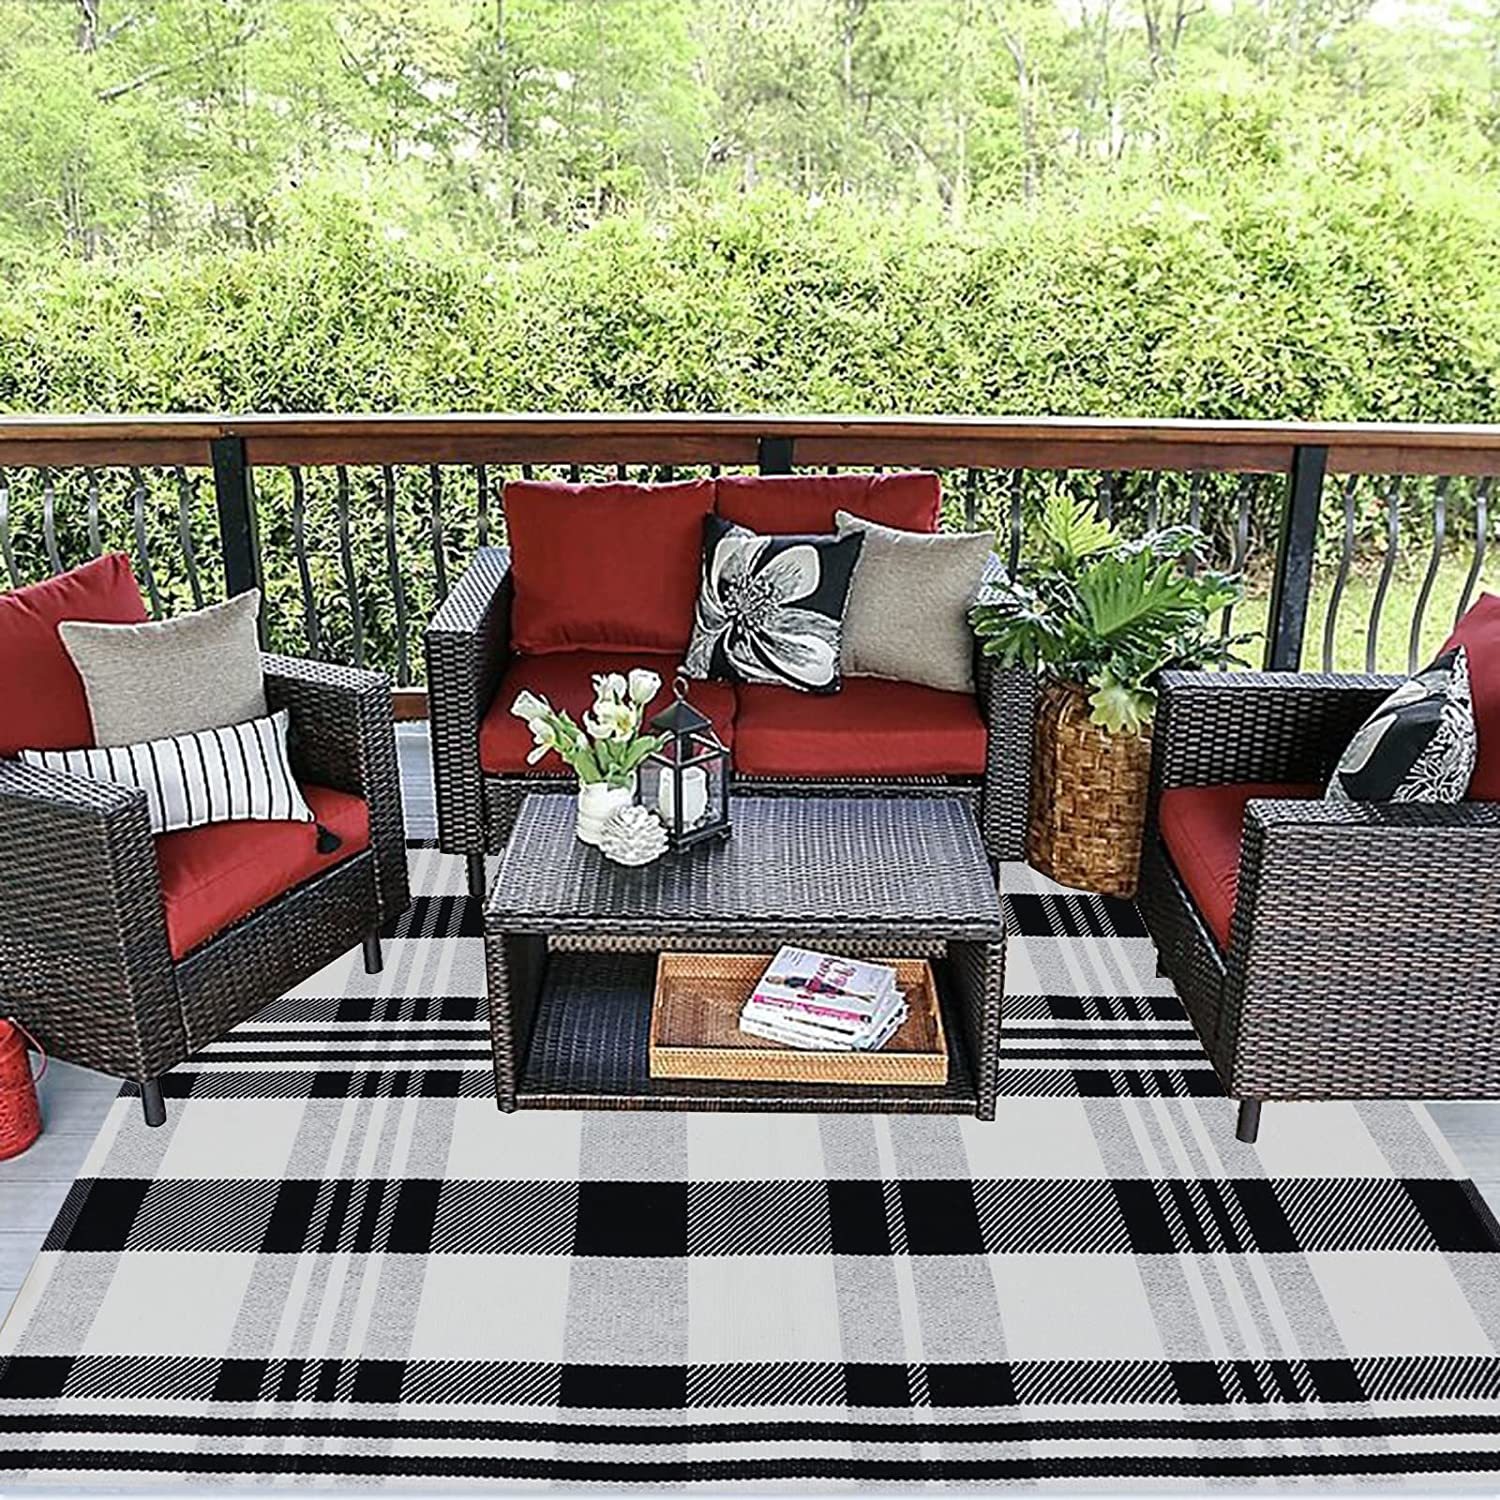 Primary image for Buffalo Plaid Rug 4' X 6' Black And White Outtdoor Rug Cotton, 4' X 6'